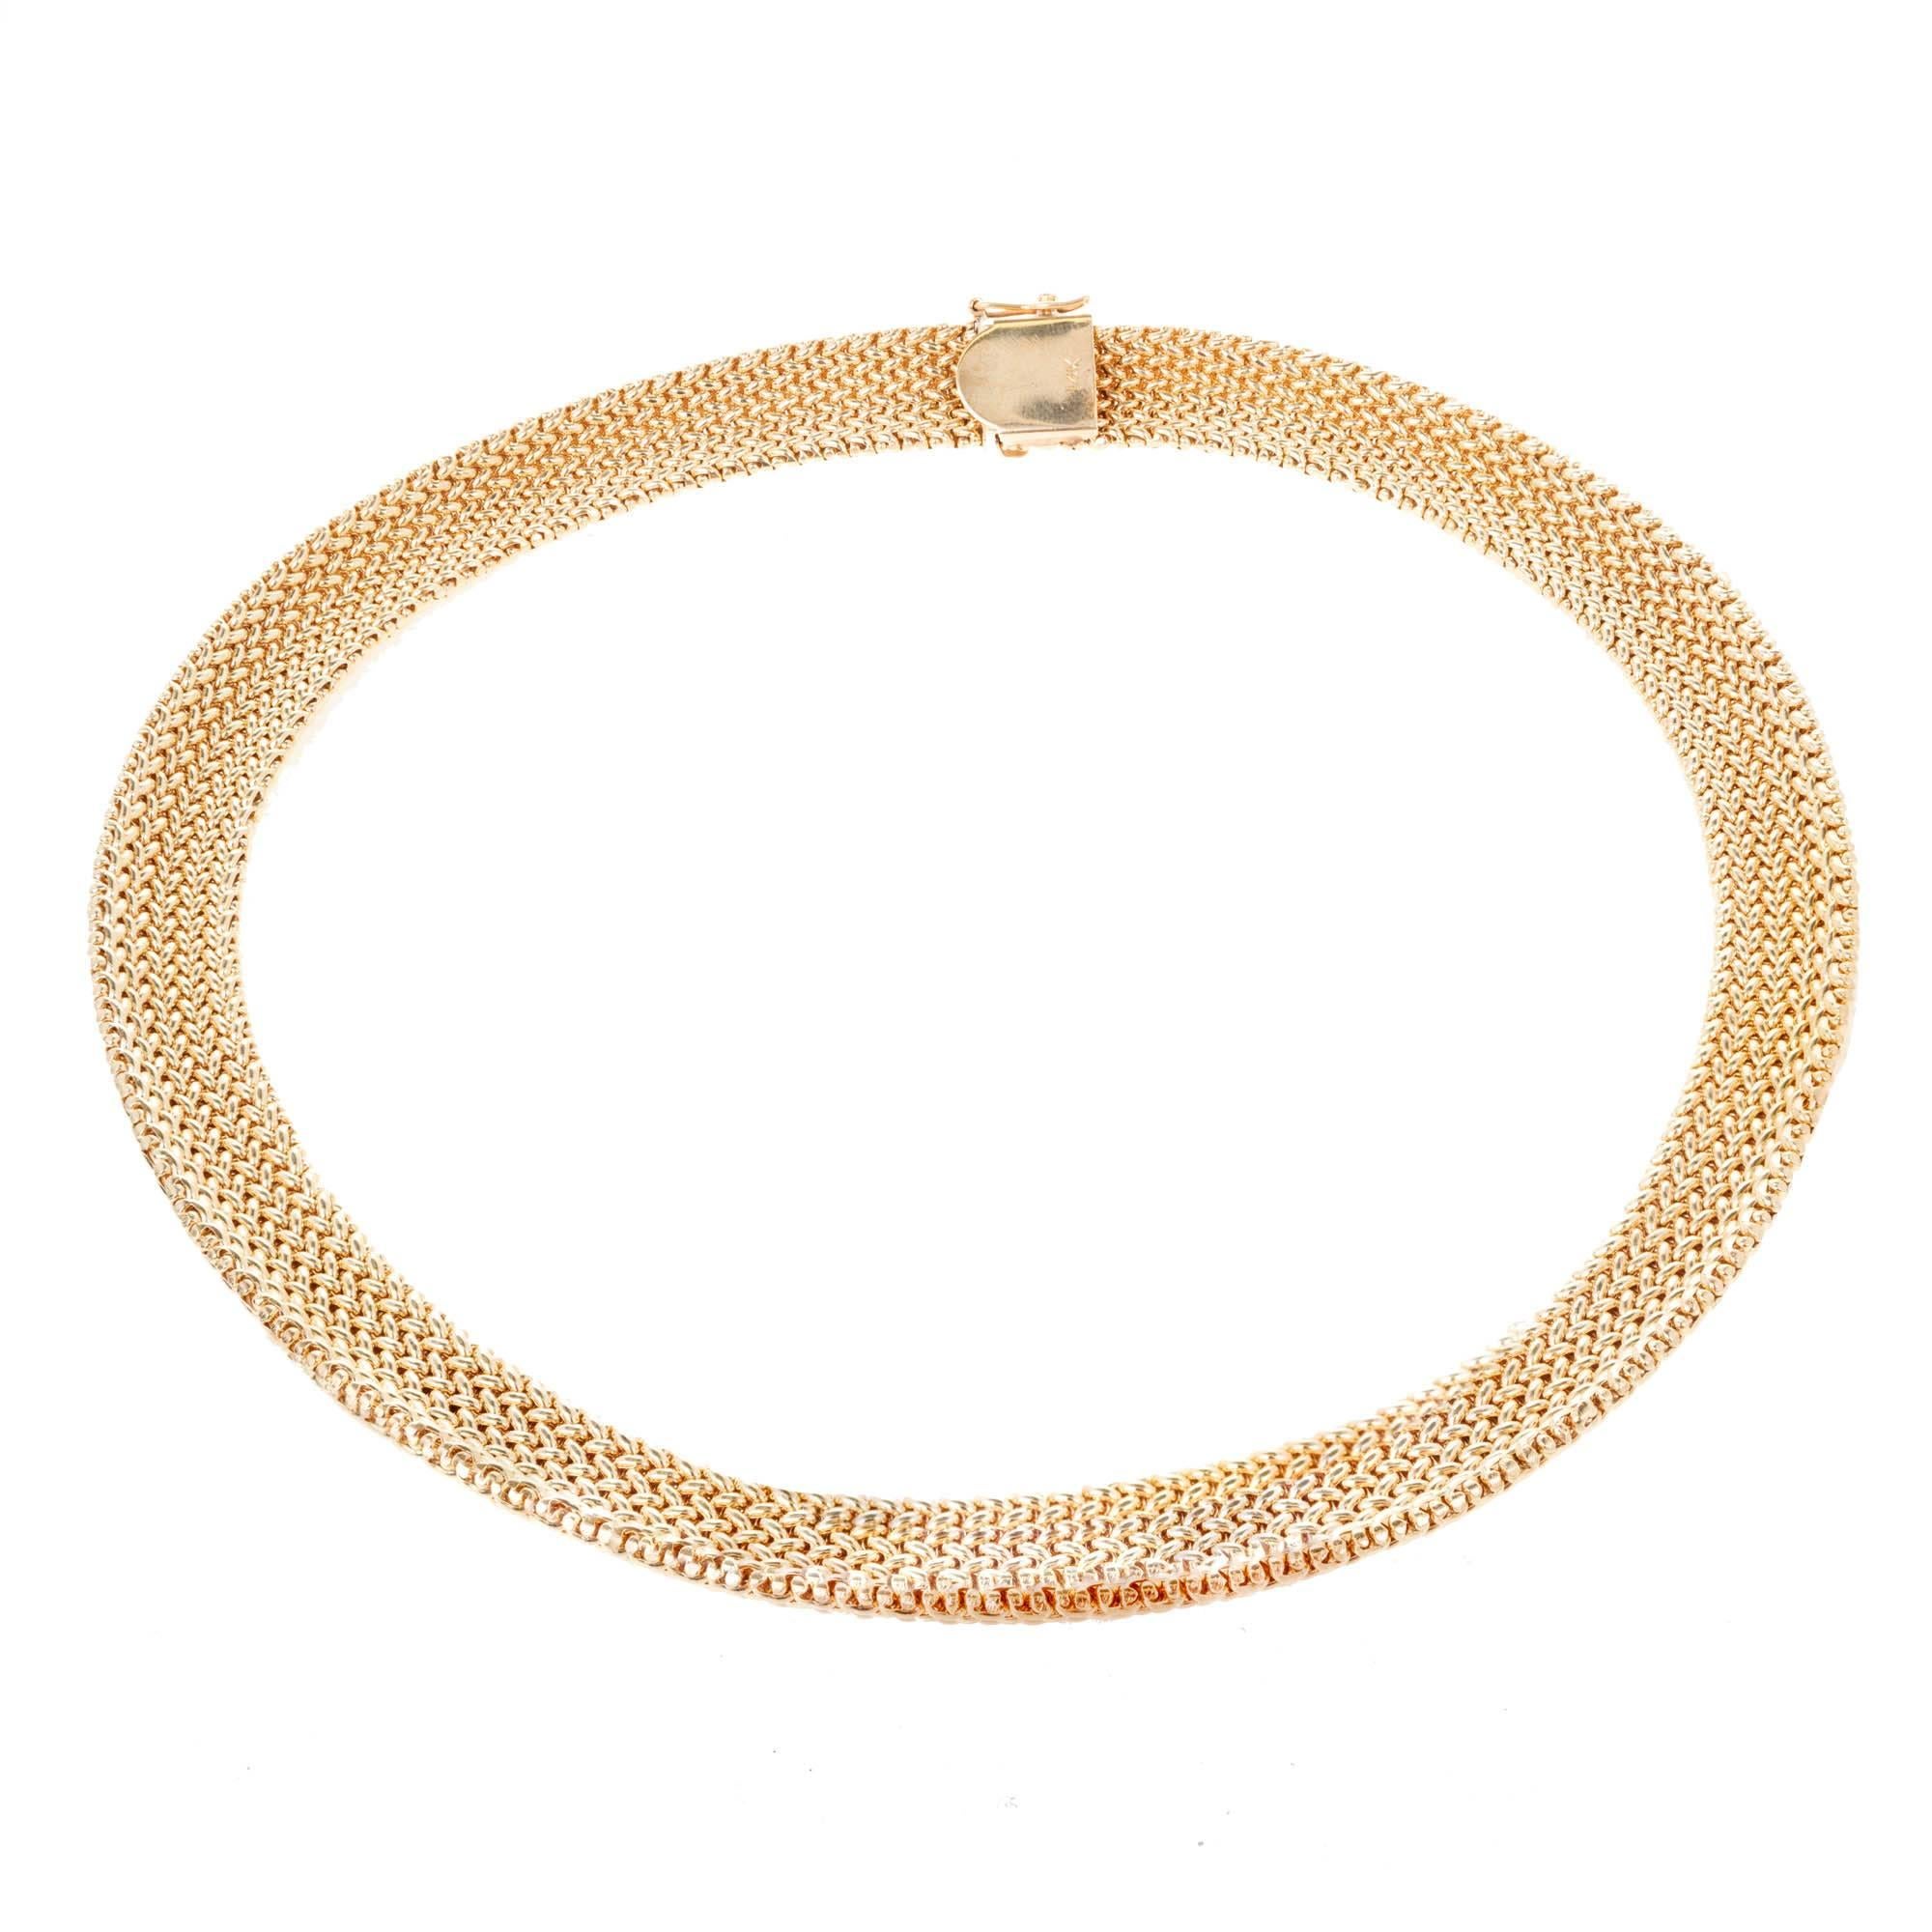 Domed mesh 16 inch 14k yellow gold 12mm wide necklace with built in catch and side lock safety. 16 inches in length. 

14k yellow gold
Stamped: 14k
Hallmark: PAT 4697315
Total length: 16 inches
Width: 12mm
Thickness/Depth: 3.12
68.5 Grams
